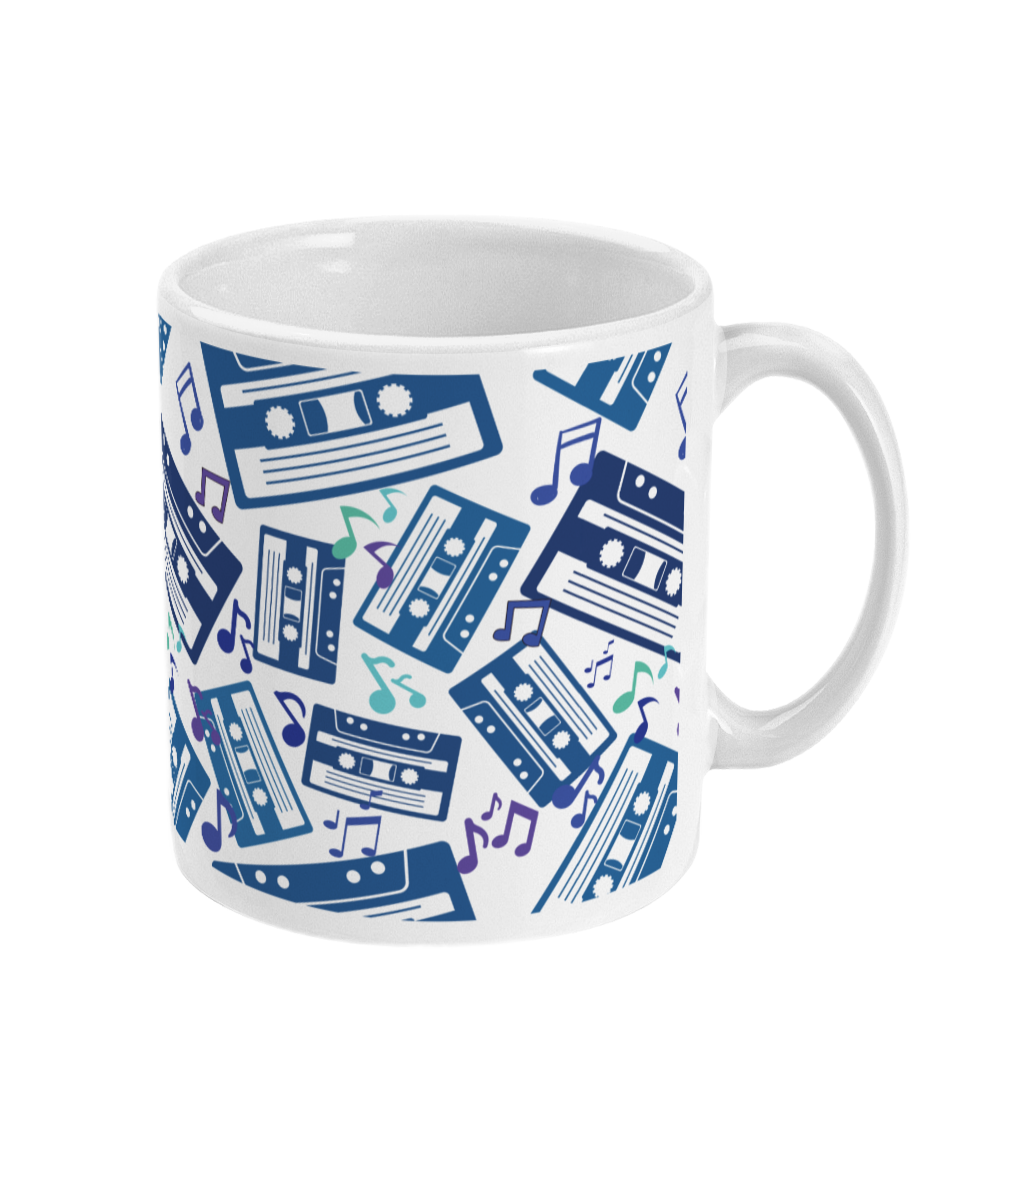 White mug with blue toned and purple music notes and cassette tapes spread out at different angles in different shades of blue around the sides and front.